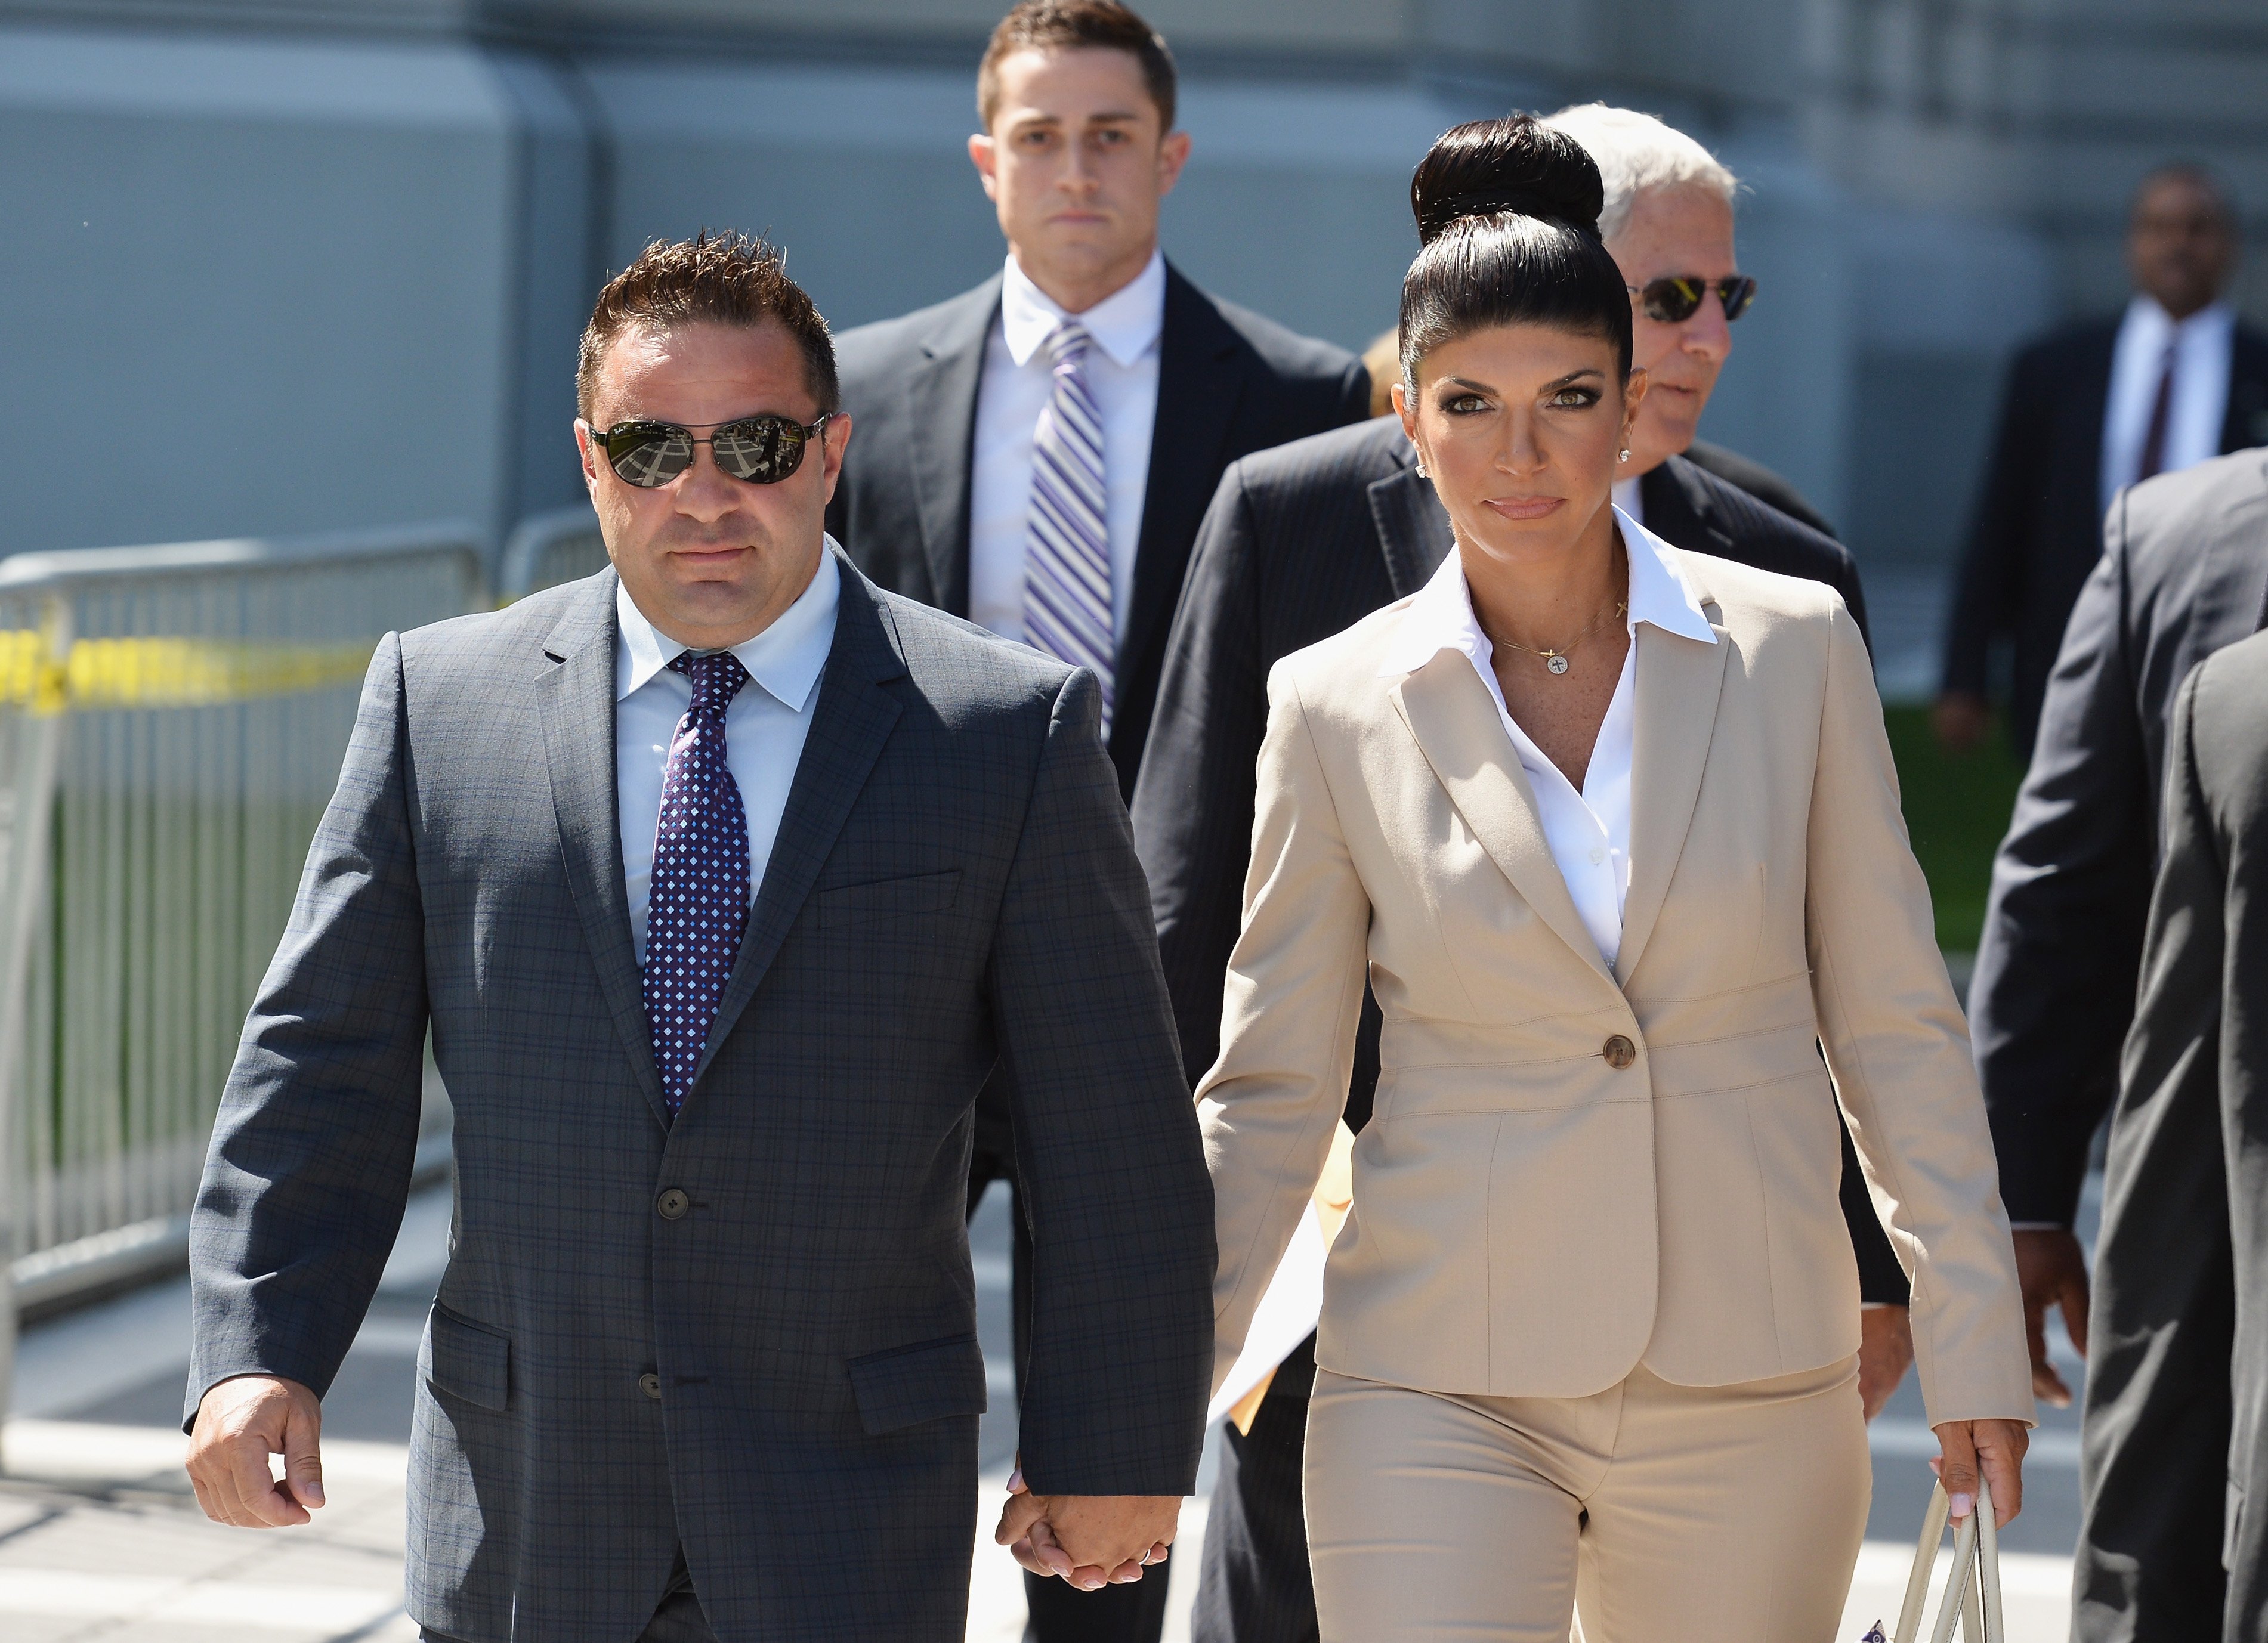 Joe Giudice & Teresa Giudice leave court after facing multiple charges of fraud on Aug. 14, 2013 in New Jersey | Photo: Getty Images